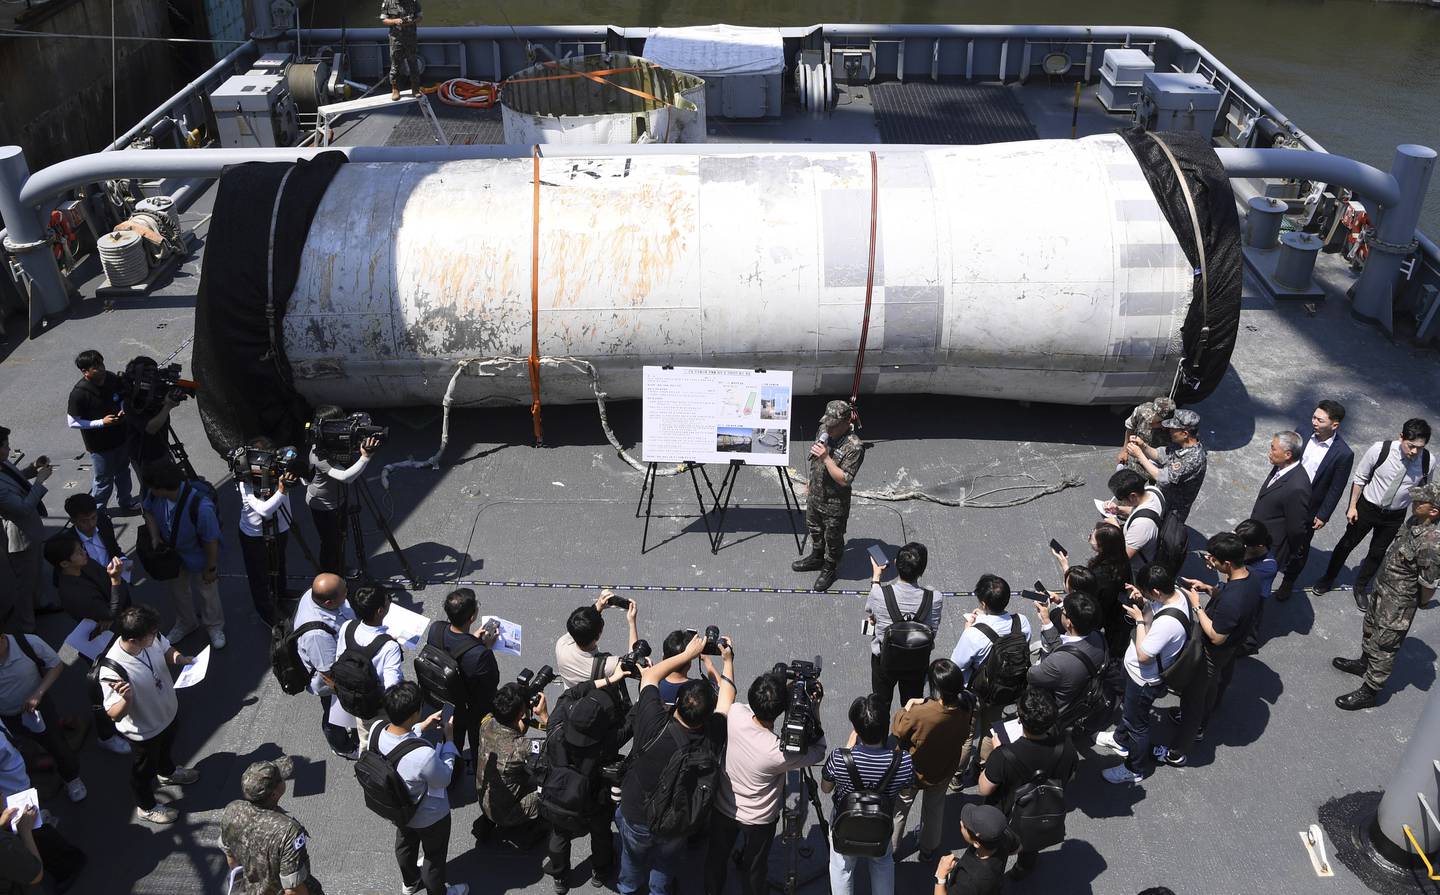 Objects salvaged by South Korea's military that are presumed to be parts of the North Korean space-launch vehicle that crashed into sea following a launch failure, are displayed at the Navy's 2nd Fleet Command in Pyeongtaek, South Korea, Friday, June 16, 2023.